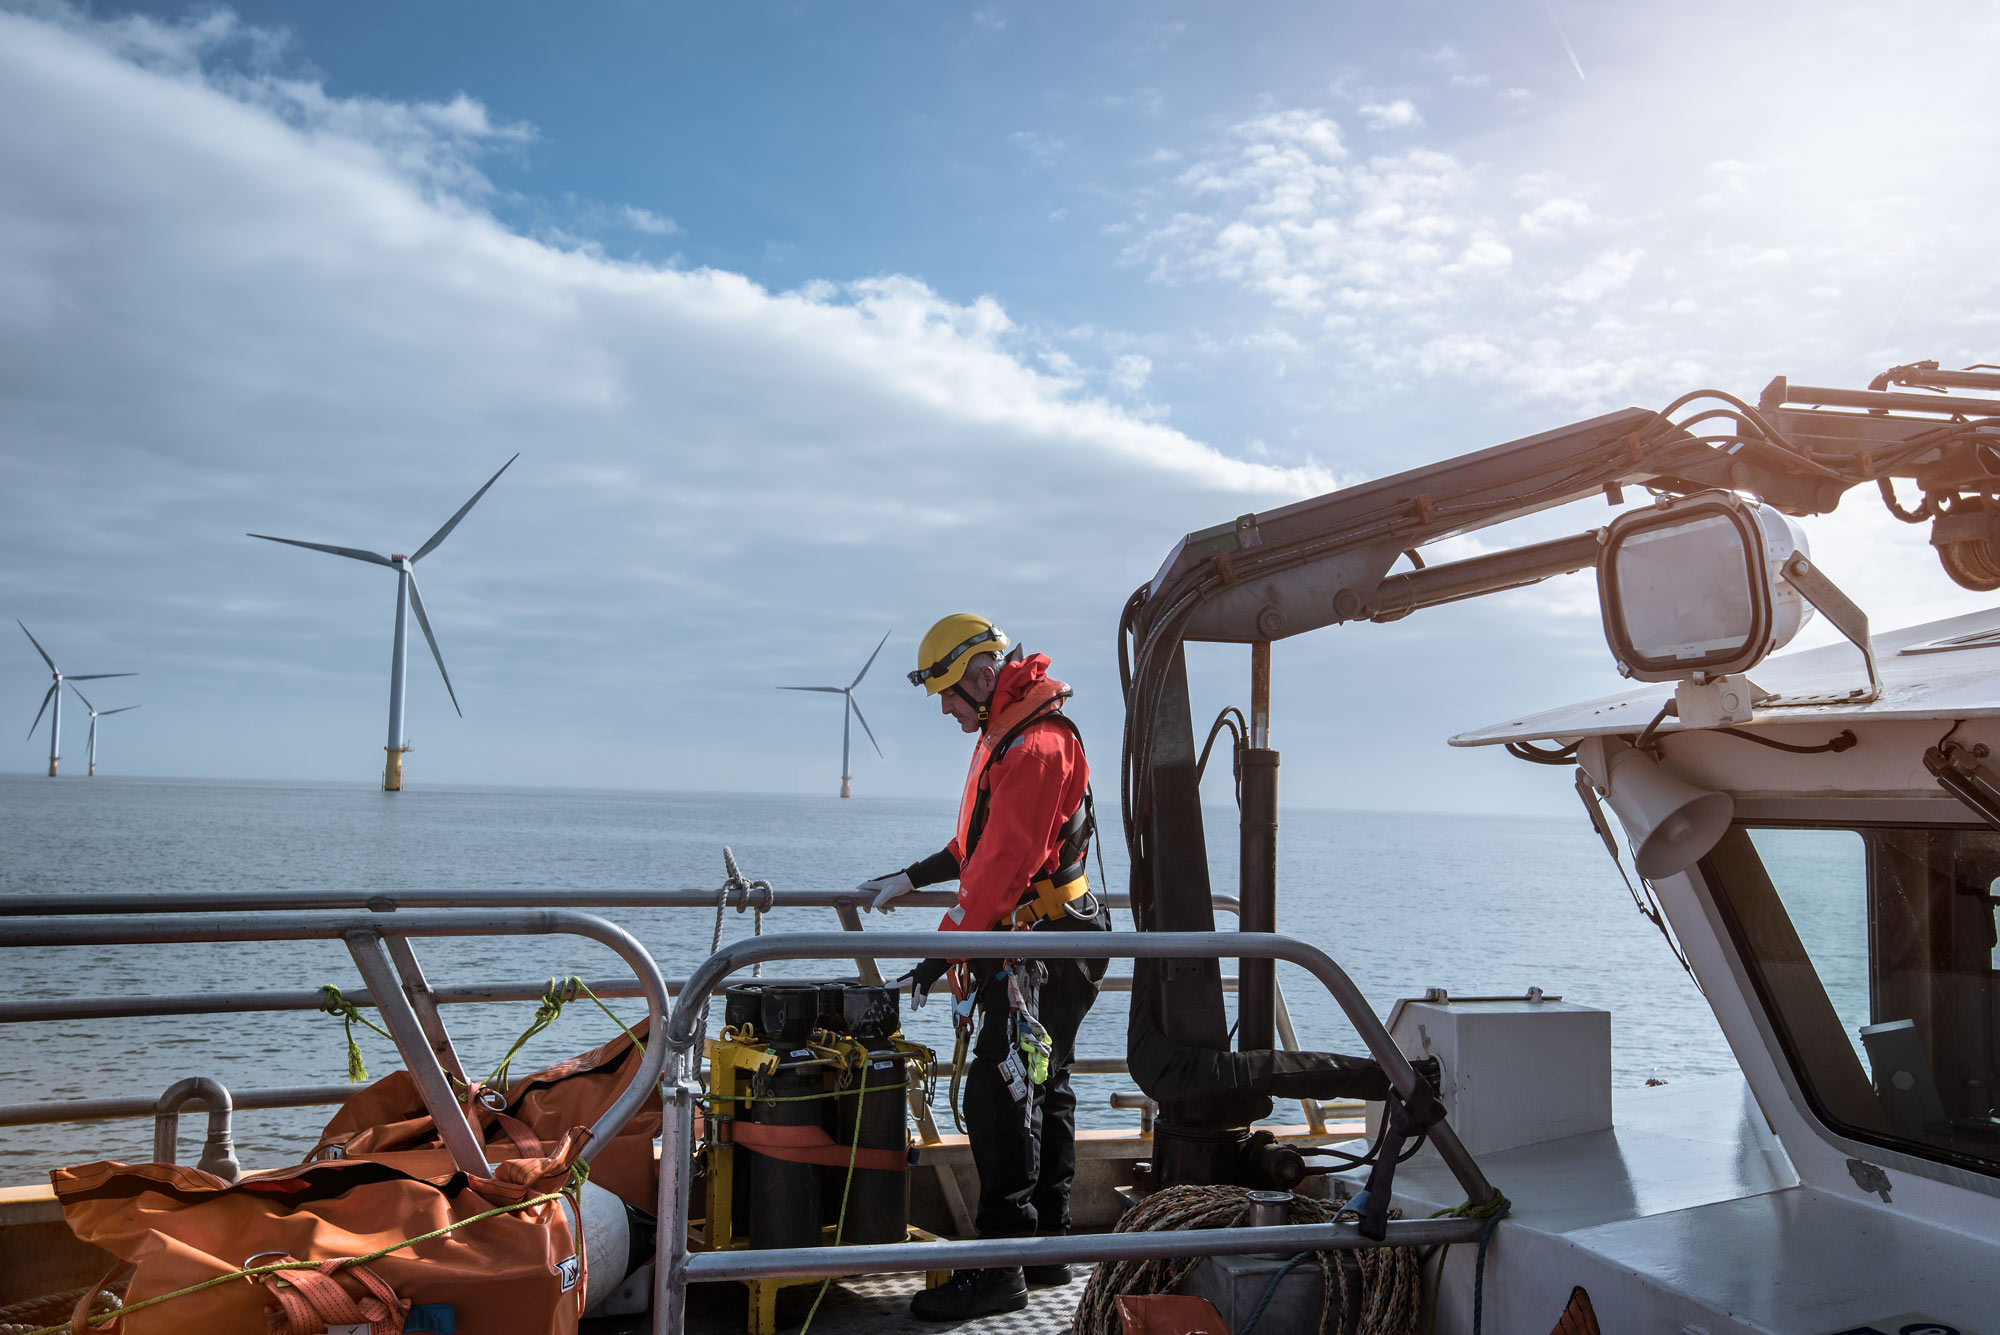 Groups Urge BOEM to Consider Environmental Impacts of Offshore Wind